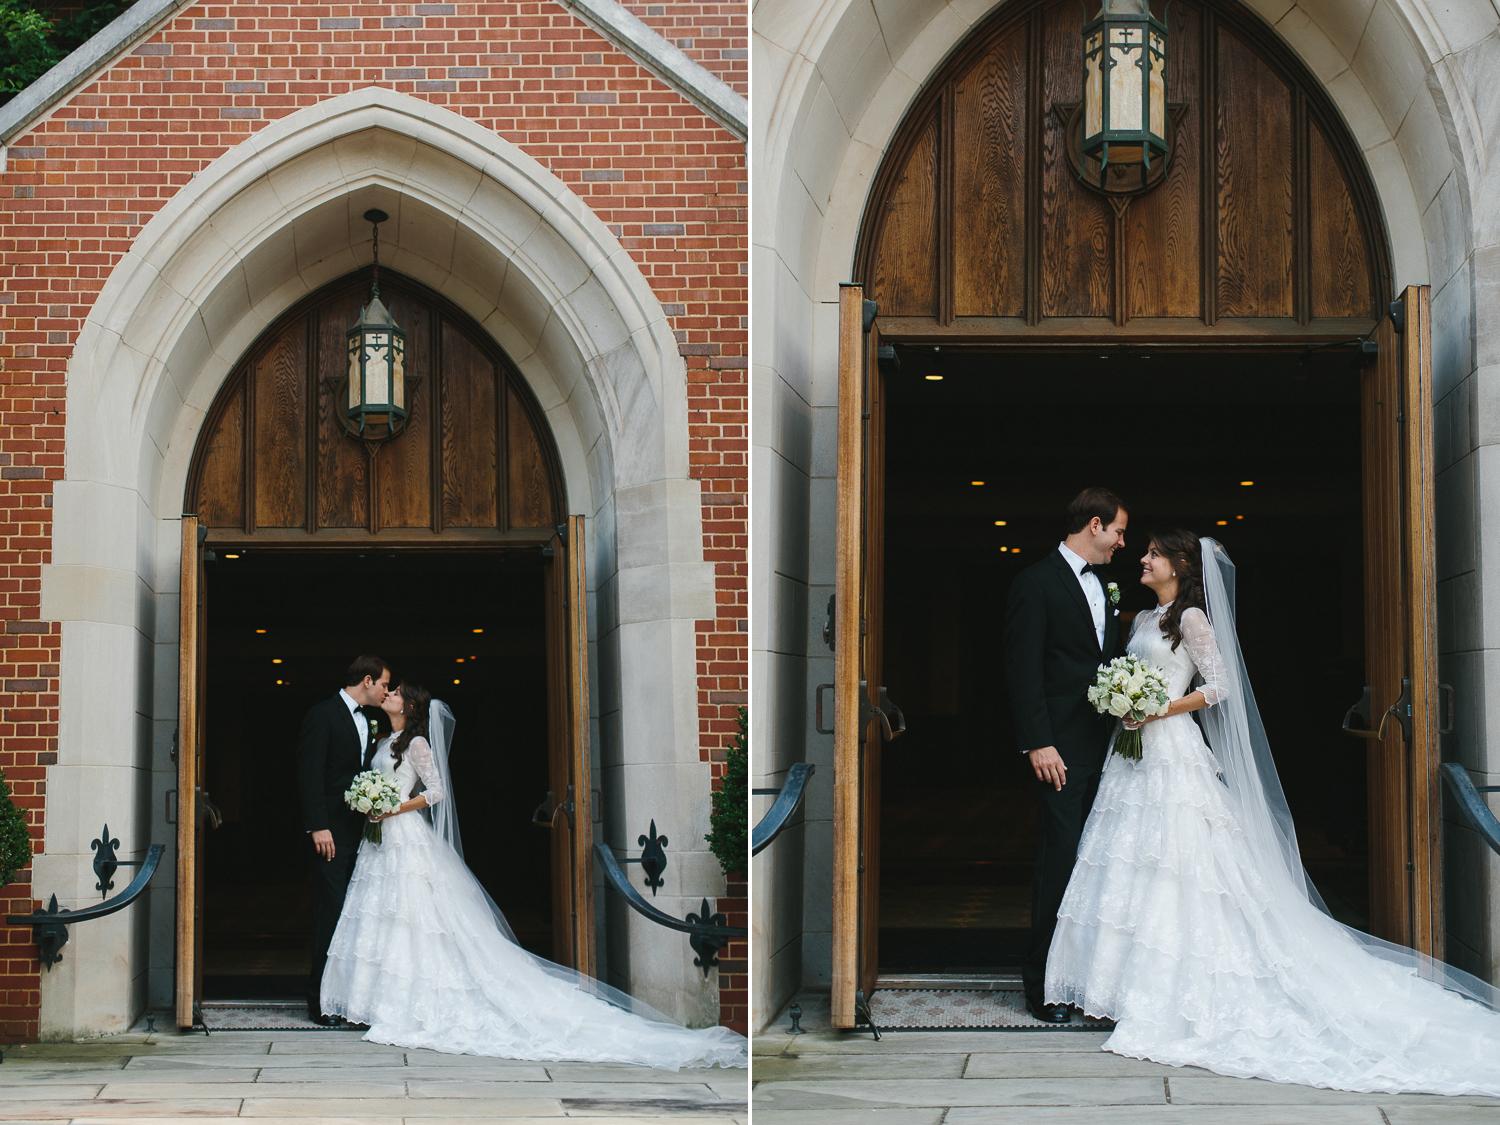 Bride and groom archway portrait